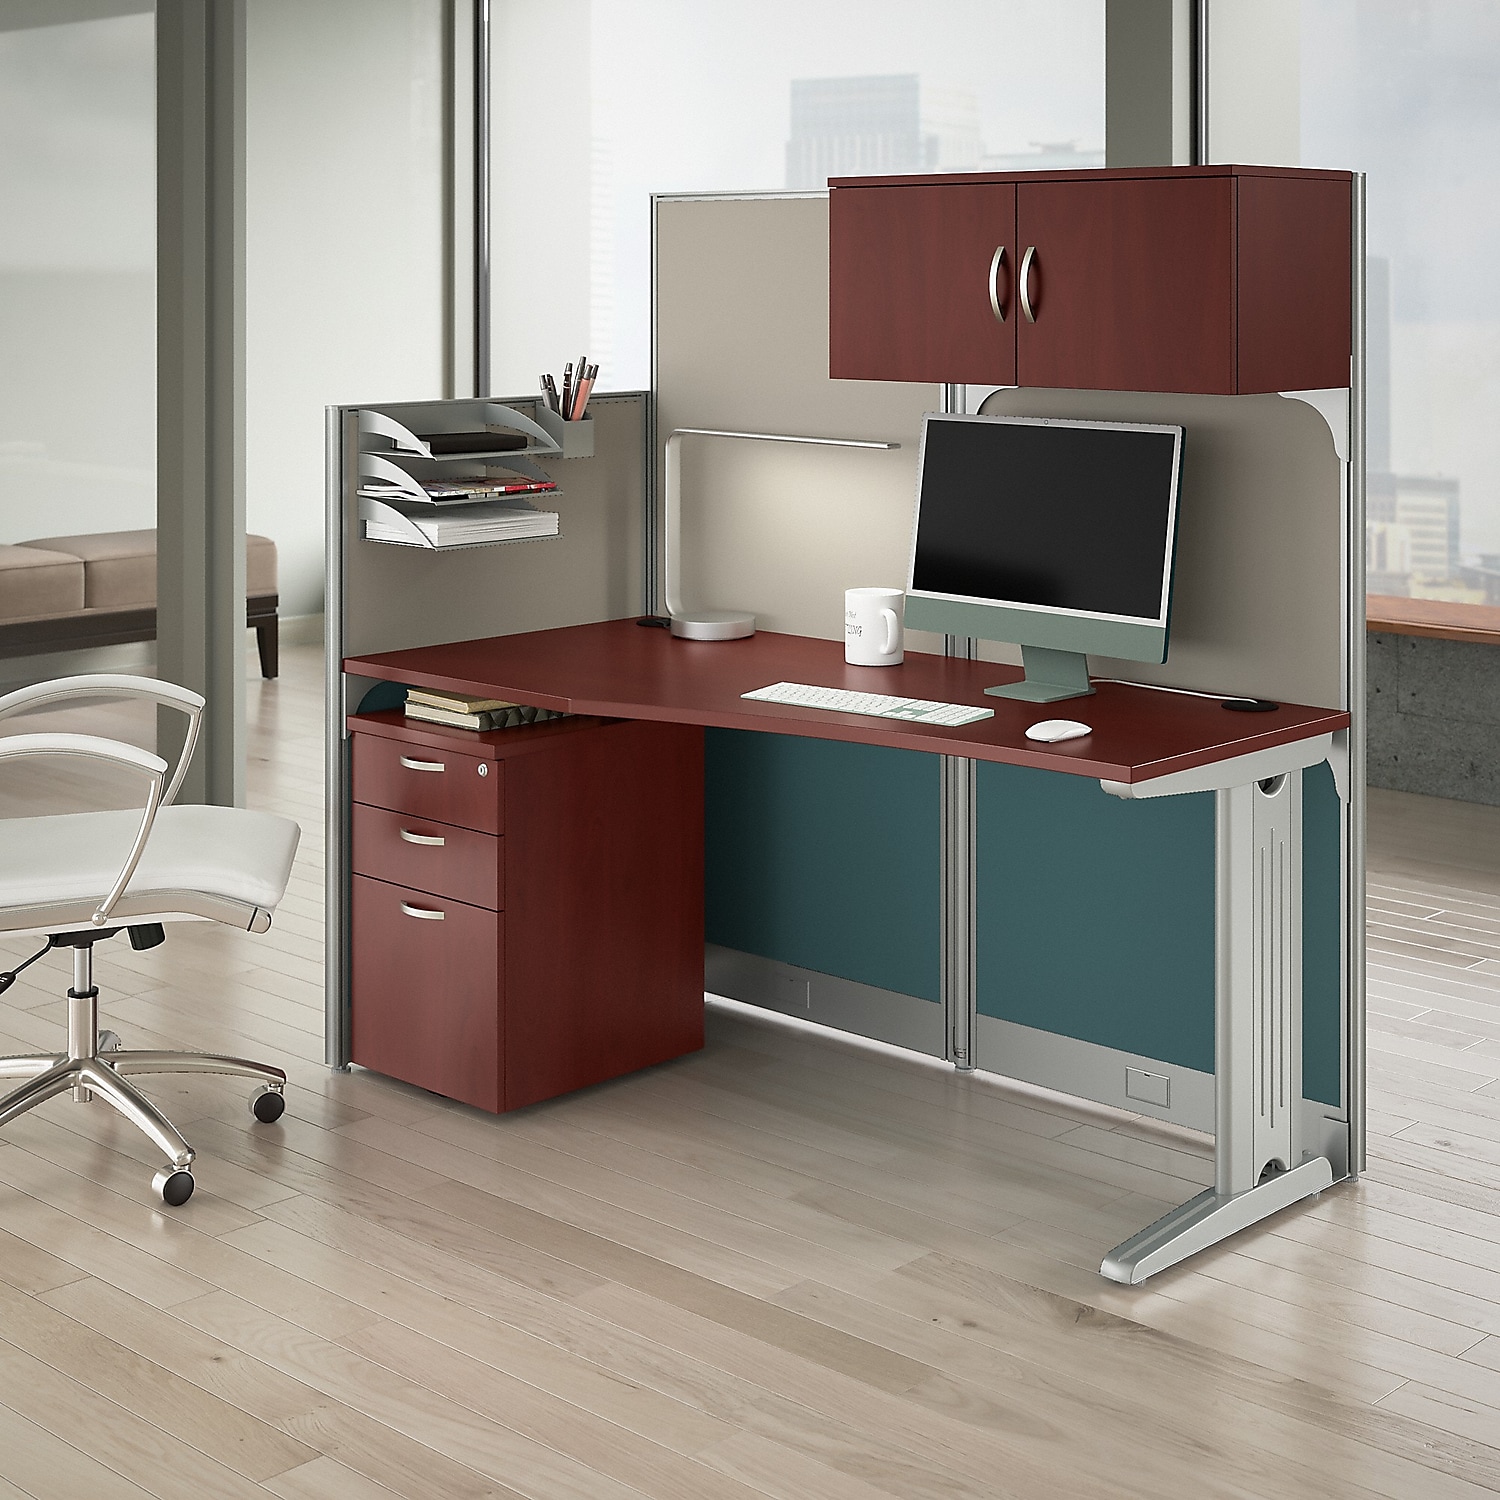 Office in an Hour Cubicle Desk with Storage in Hansen Cherry - Engineered Wood - image 2 of 9